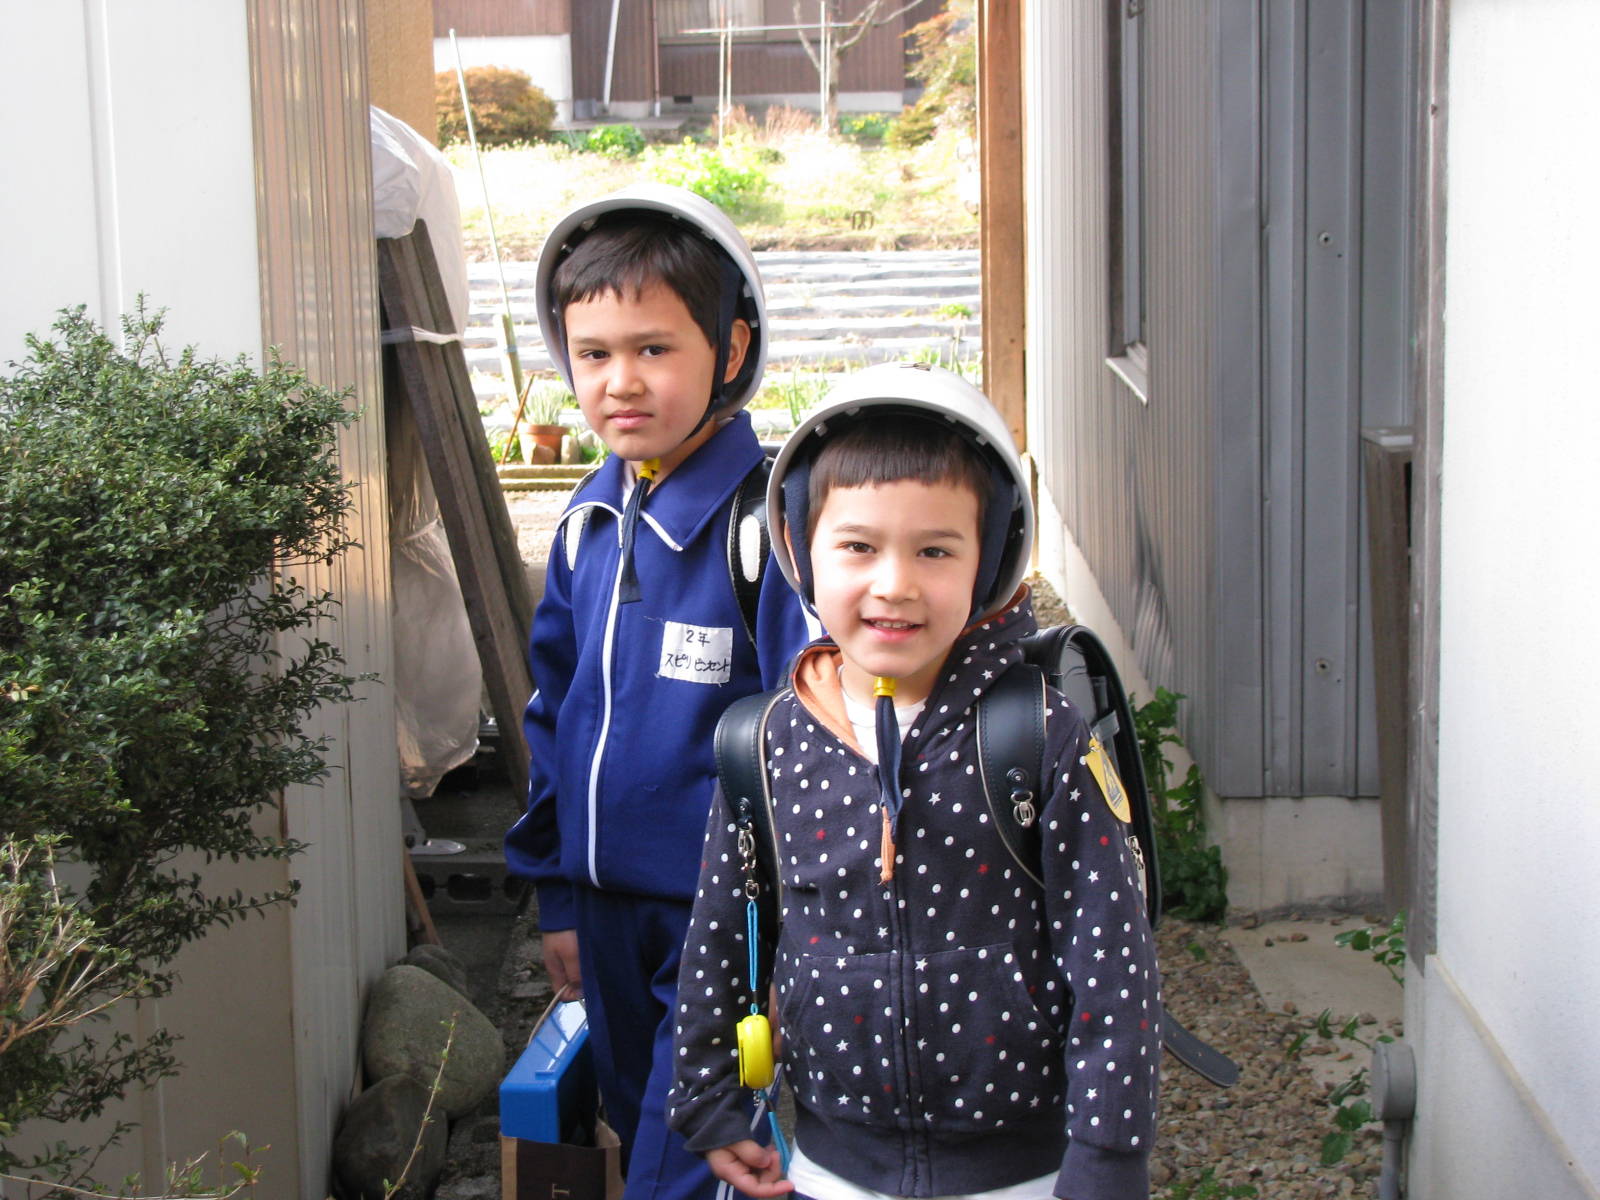 Hard-hat policy: In rural Gifu Prefecture, the author's sons were required to wear hard helmets for the five-minute walk to and from school. Rules such as these didn't go down well with Vincent (left), so his parents decided to enroll him in a Vermont-based virtual school rather than the local junior high. | JOHN SPIRI